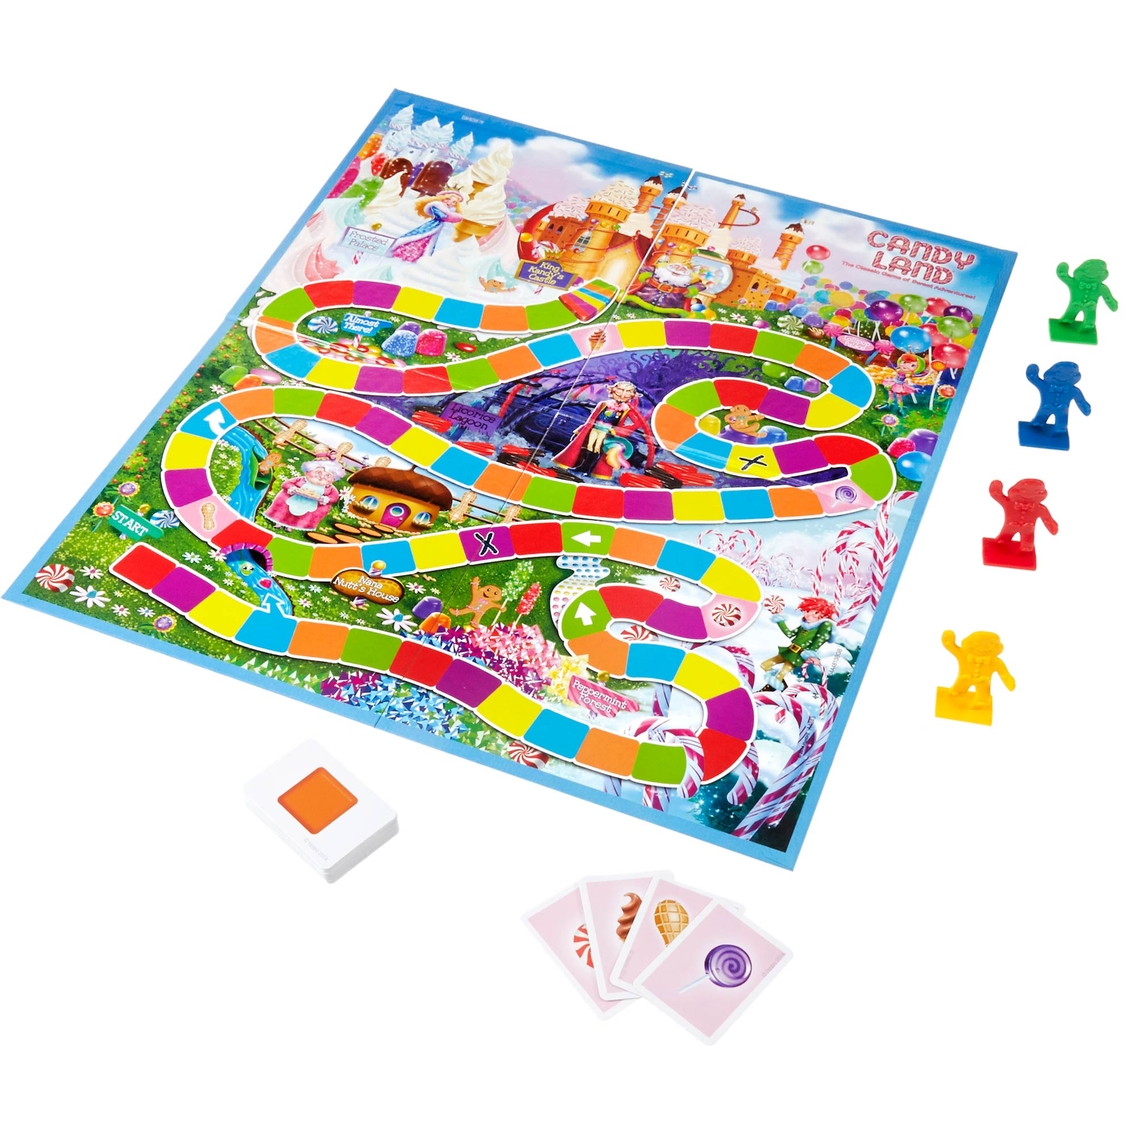 Hasbro Candy Land Game - Image 2 of 2